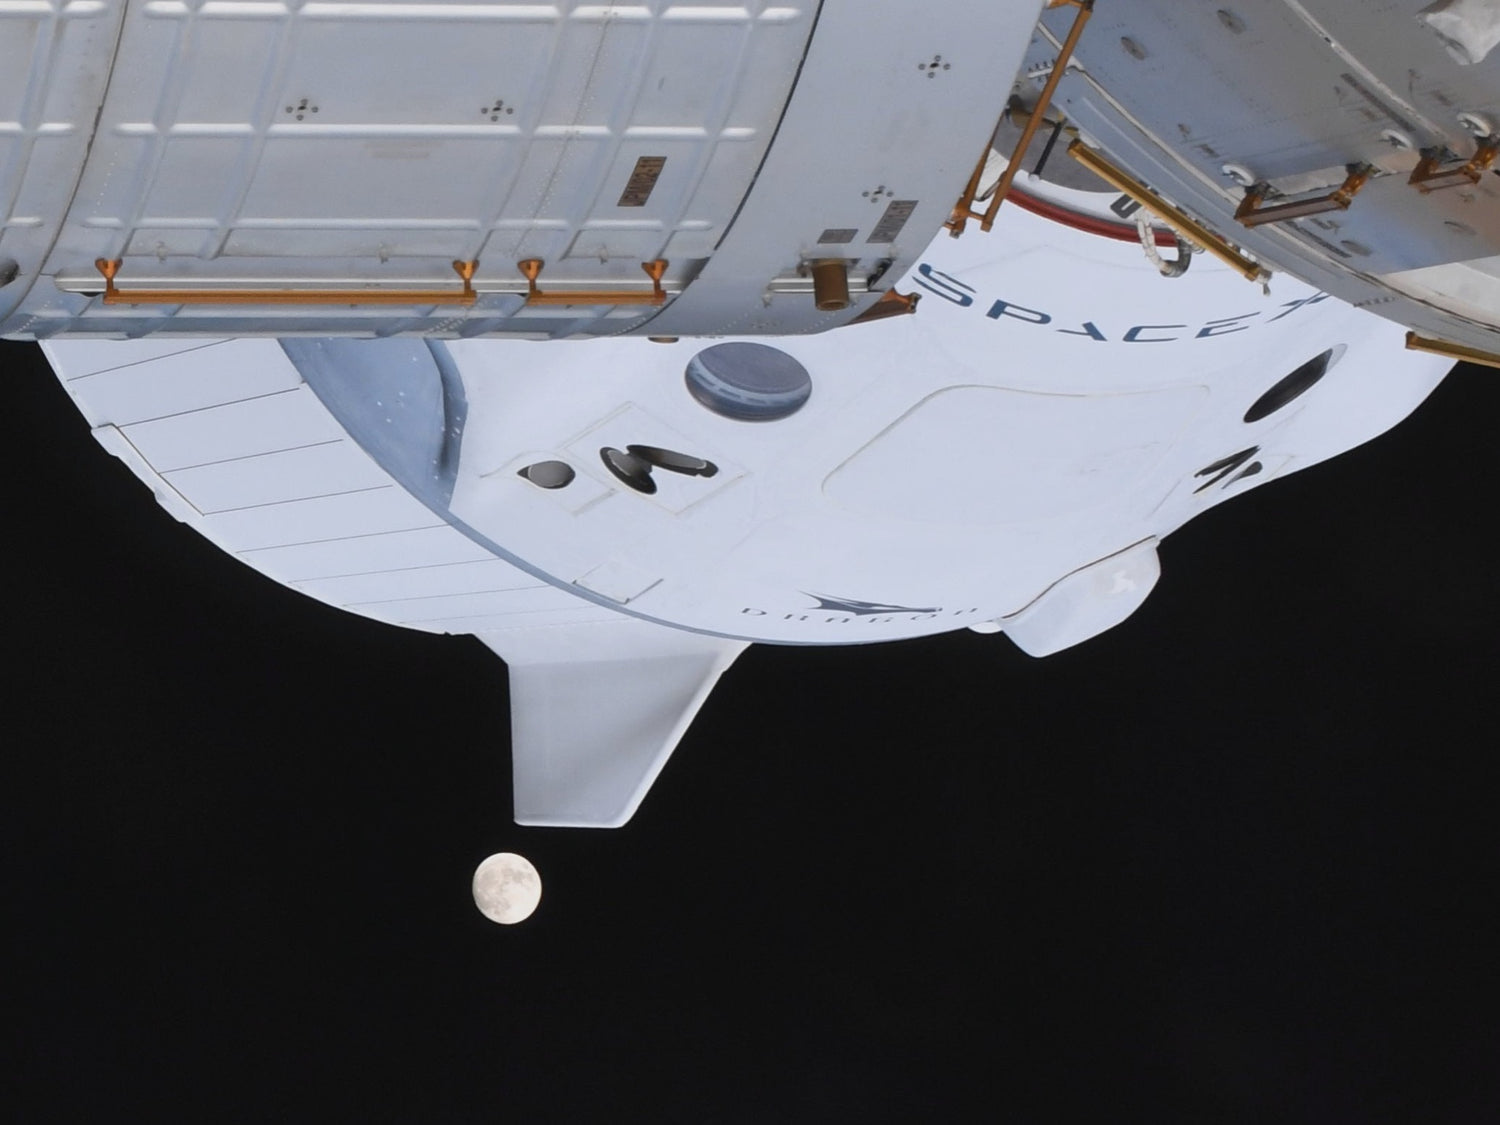 The Space Station will have a pair of SpaceX Dragon spacecrafts docked simultaneously